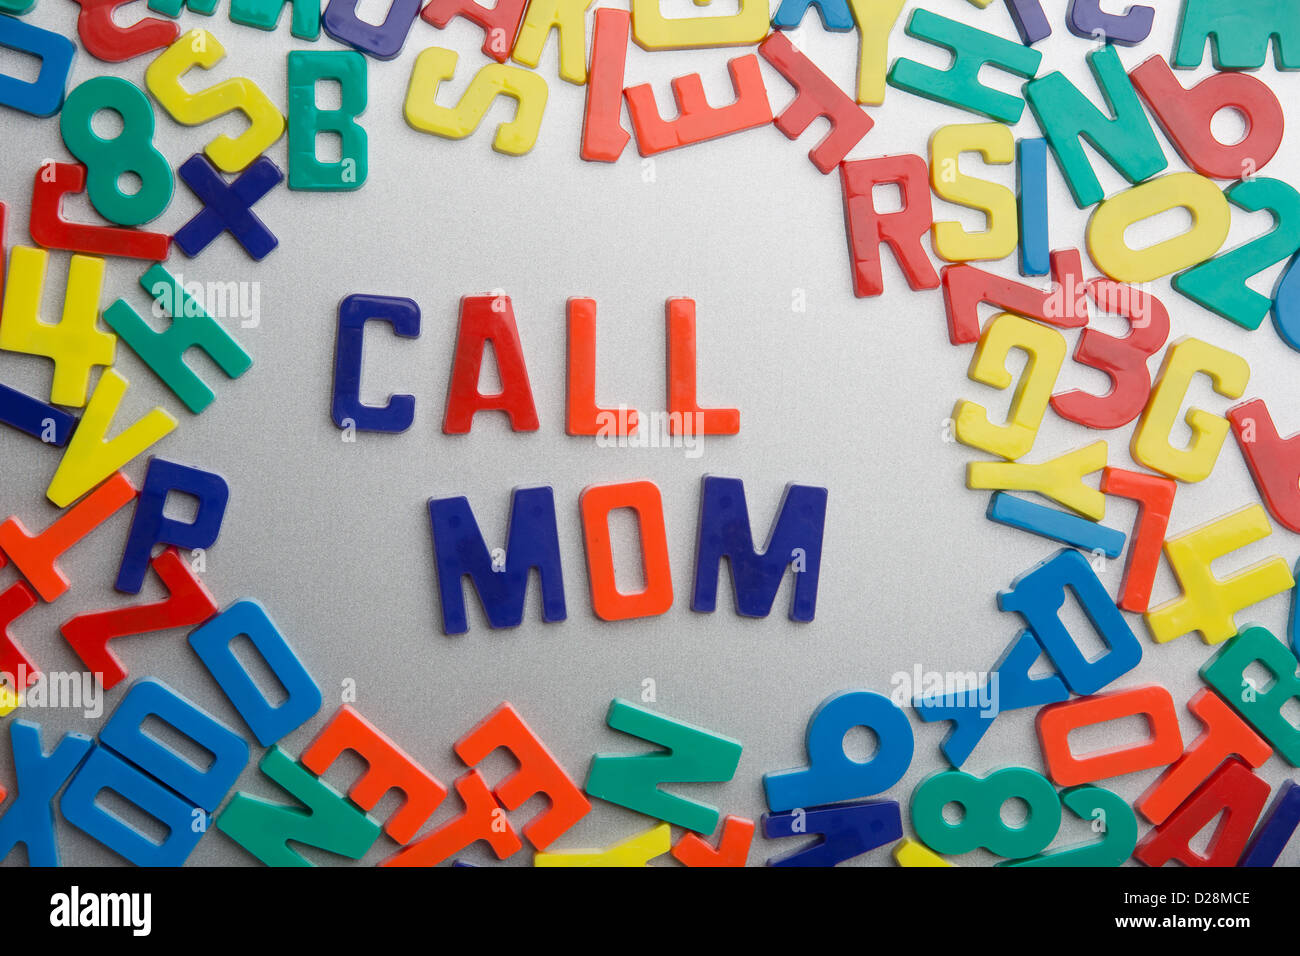 'Call Mom' - Refrigerator magnets spell a message out of a jumble of letters Stock Photo